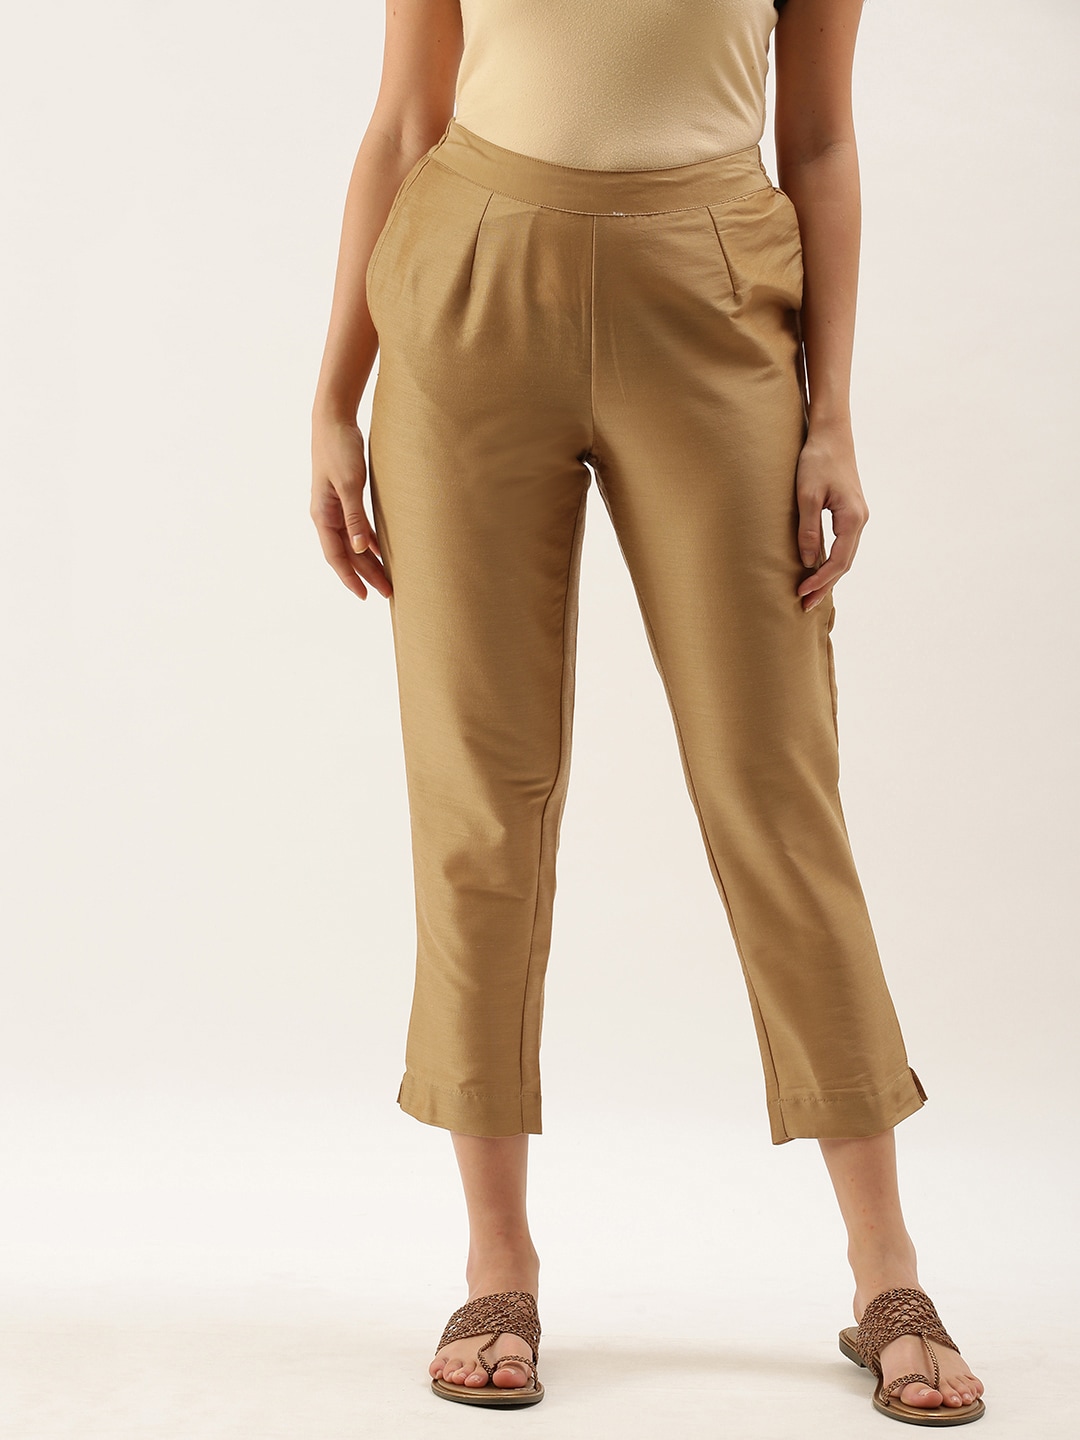 Anouk Women Gold-Toned Cigarette Trousers Price in India